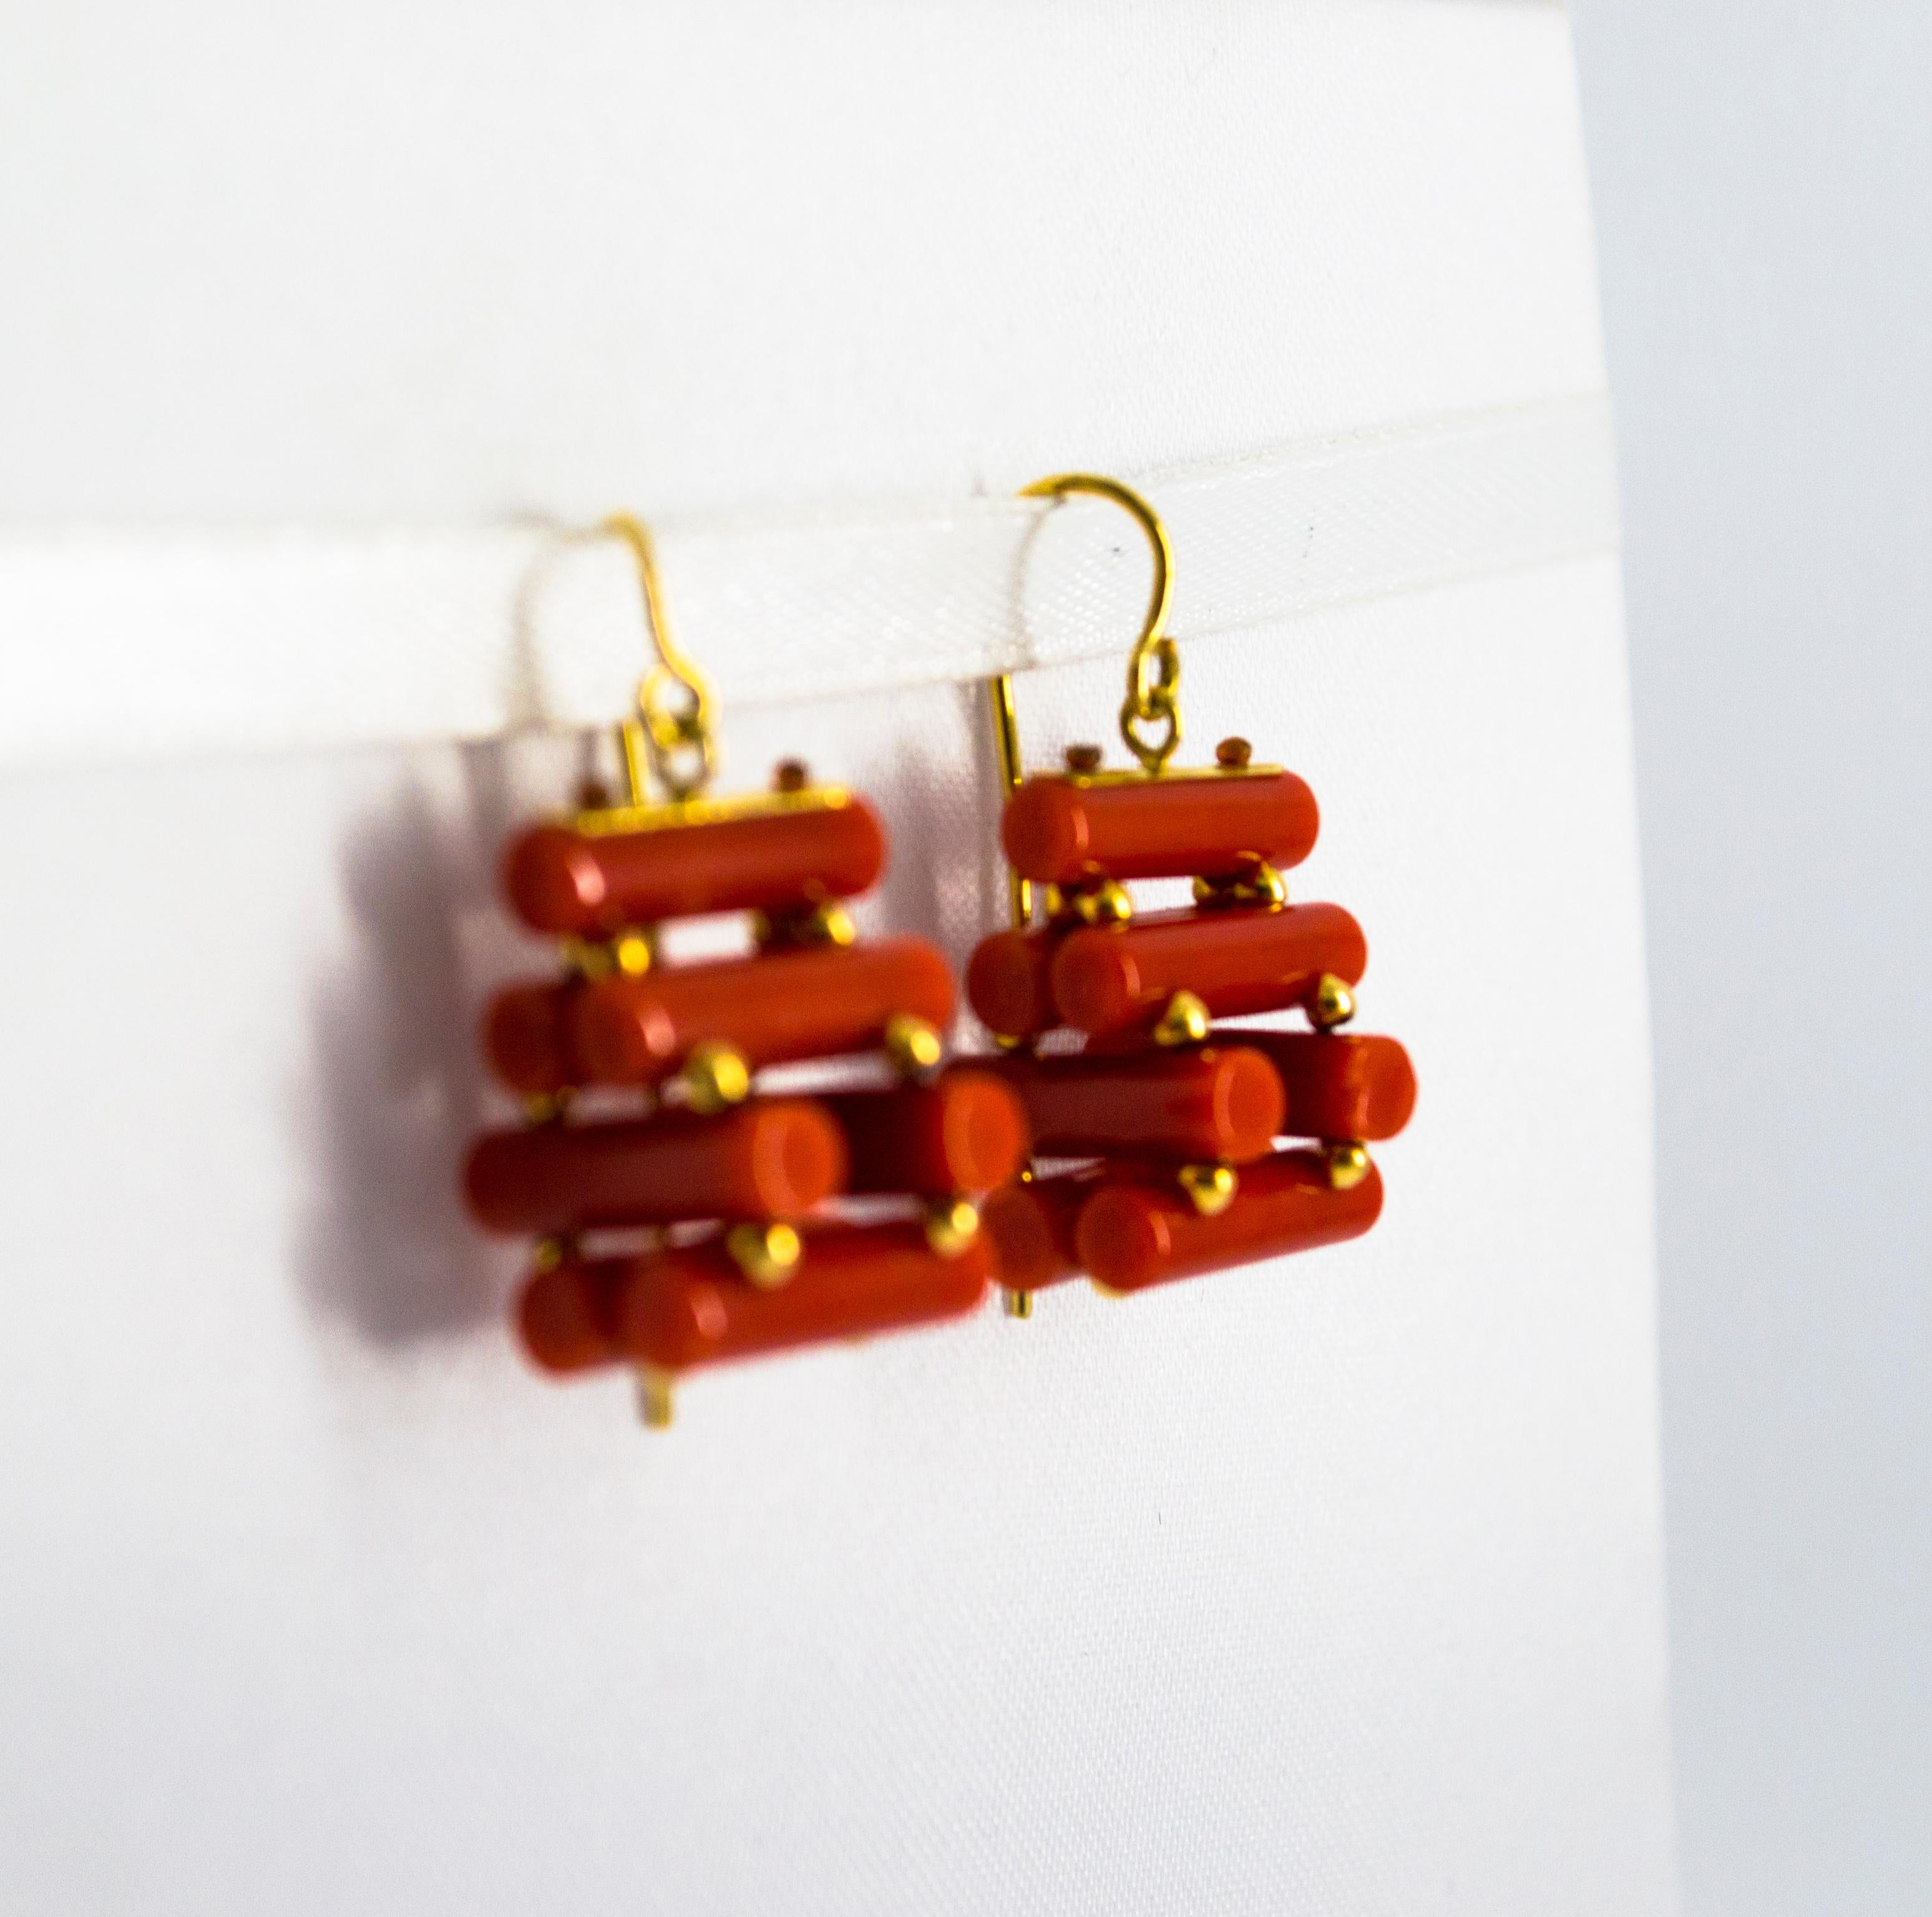 These Earrings are made of 18K Yellow Gold.
These Earrings have Mediterranean (Sardinia, Italy) Red Coral.
All our Earrings have pins for pierced ears but we can change the closure and make any of our Earrings suitable even for non-pierced